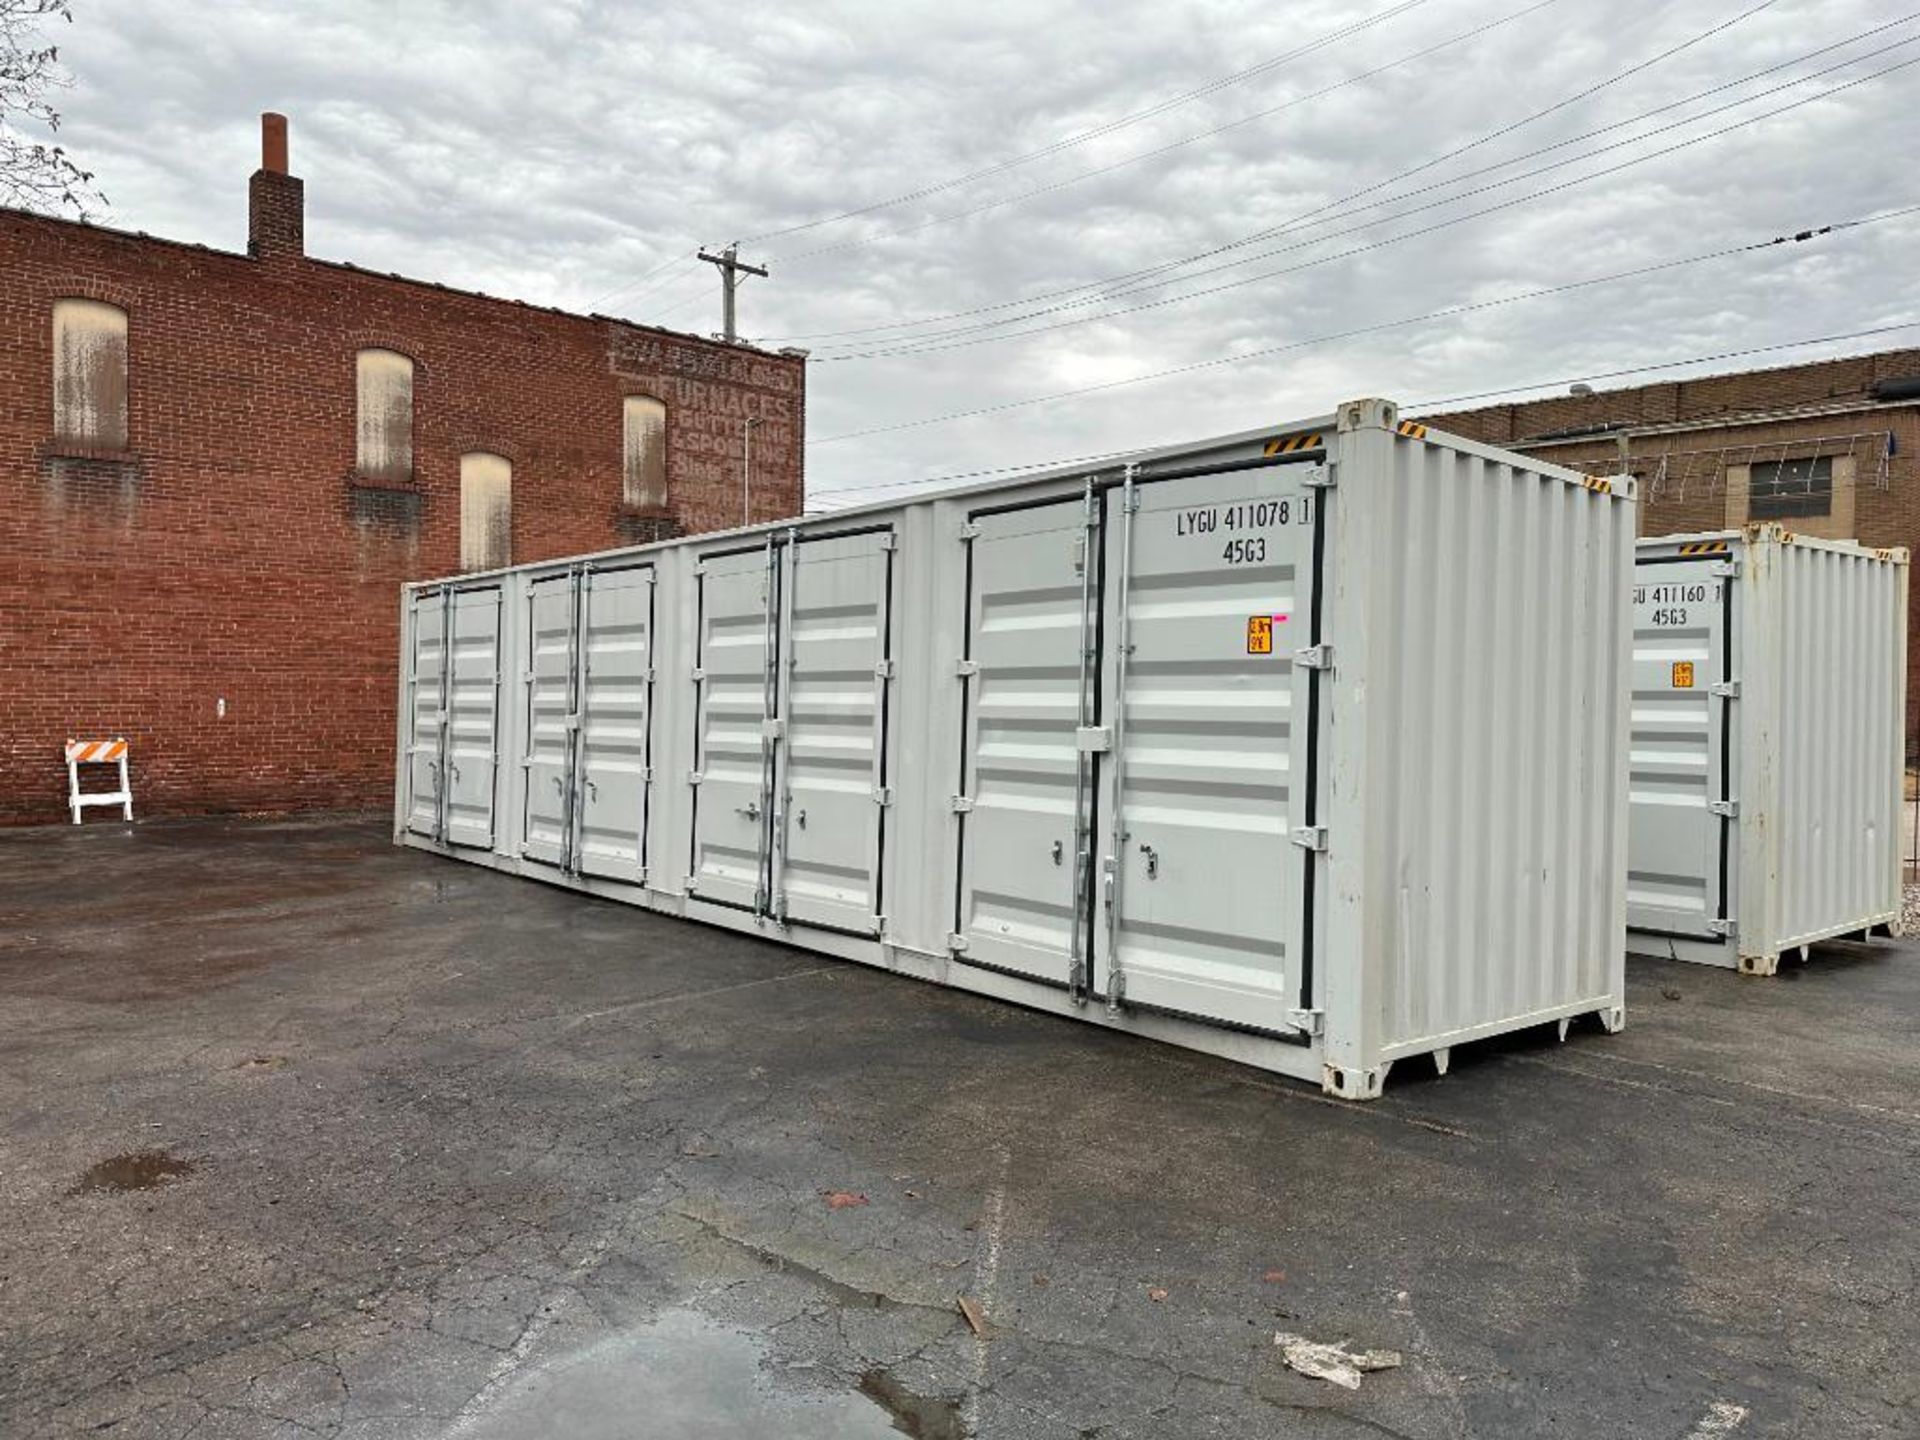 2022 40FT MULTI-DOOR SHIPPING CONTAINER BRAND/MODEL: LYGU 45G3 INFORMATION: NEW,2022 STORAGE CONTAIN - Image 4 of 23